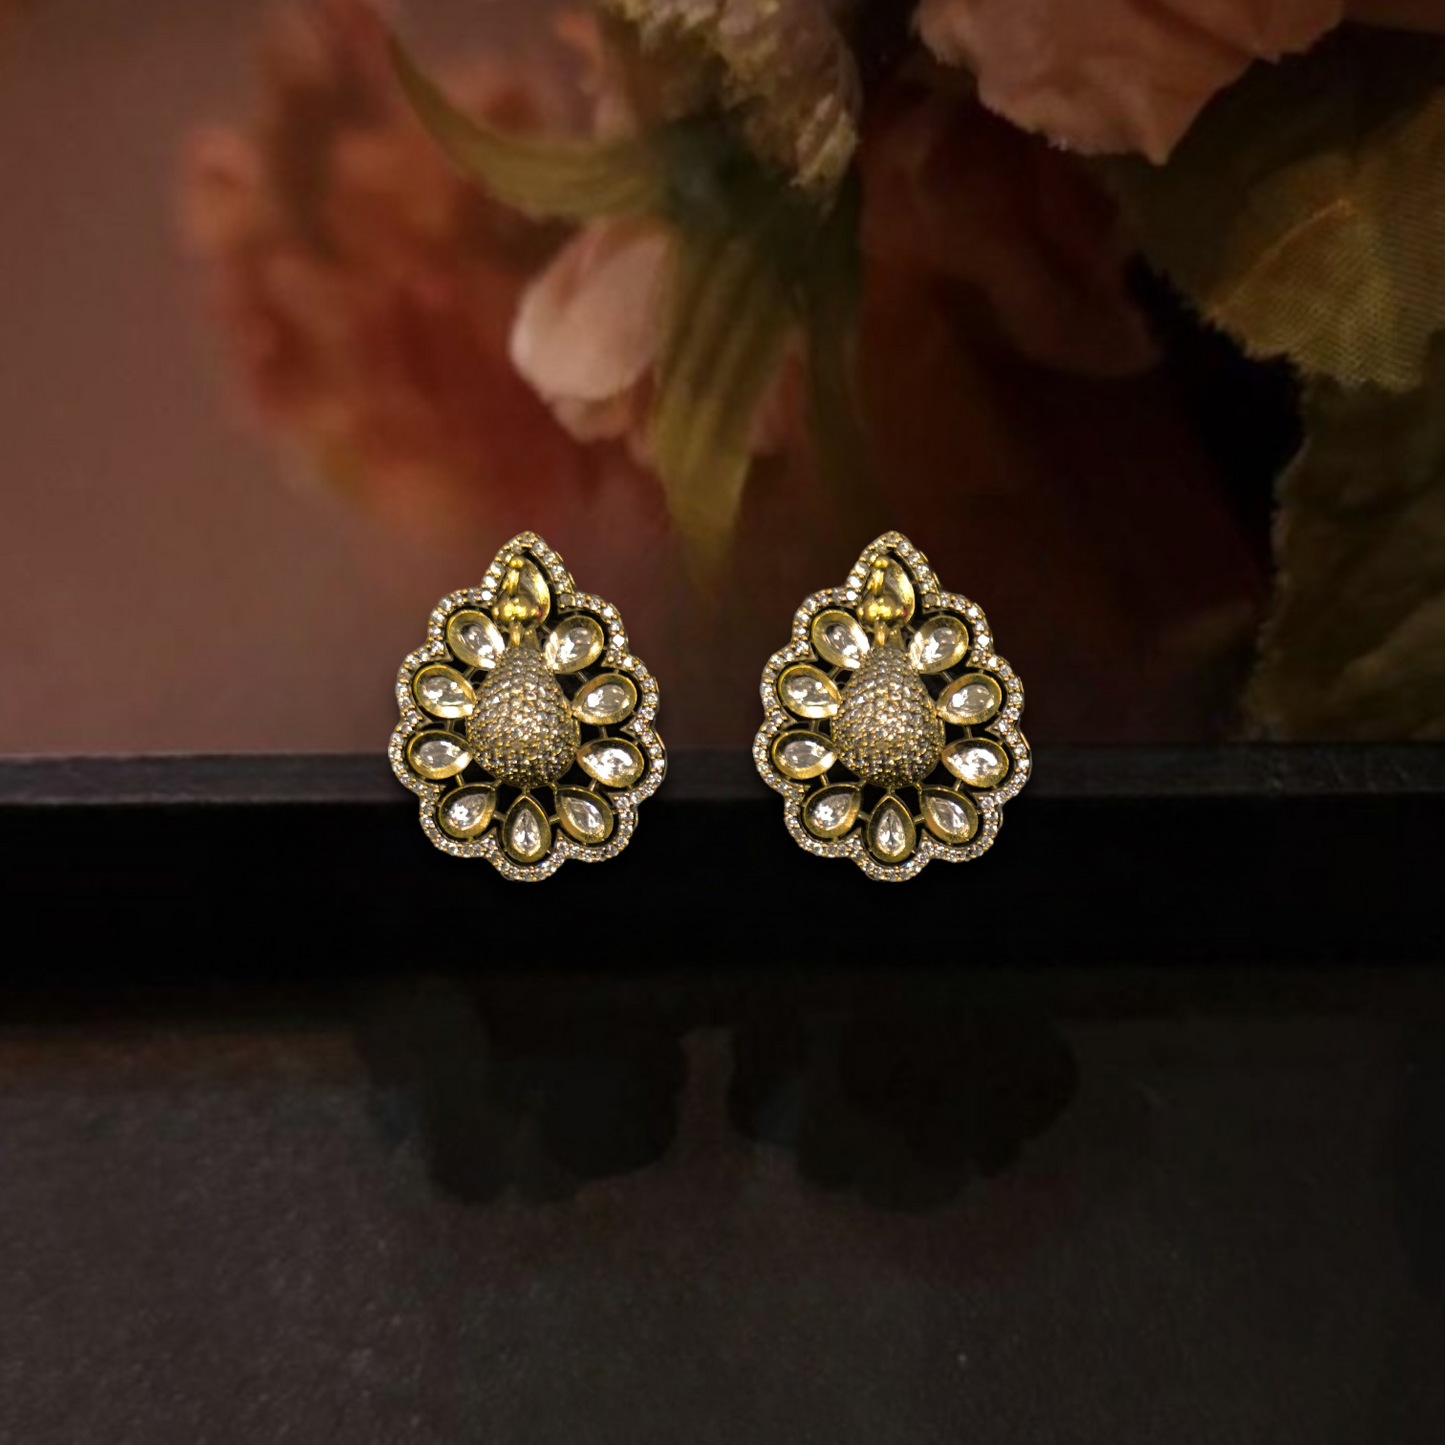 3D Popping Peacock design Victorian Polki Studs with zircons.